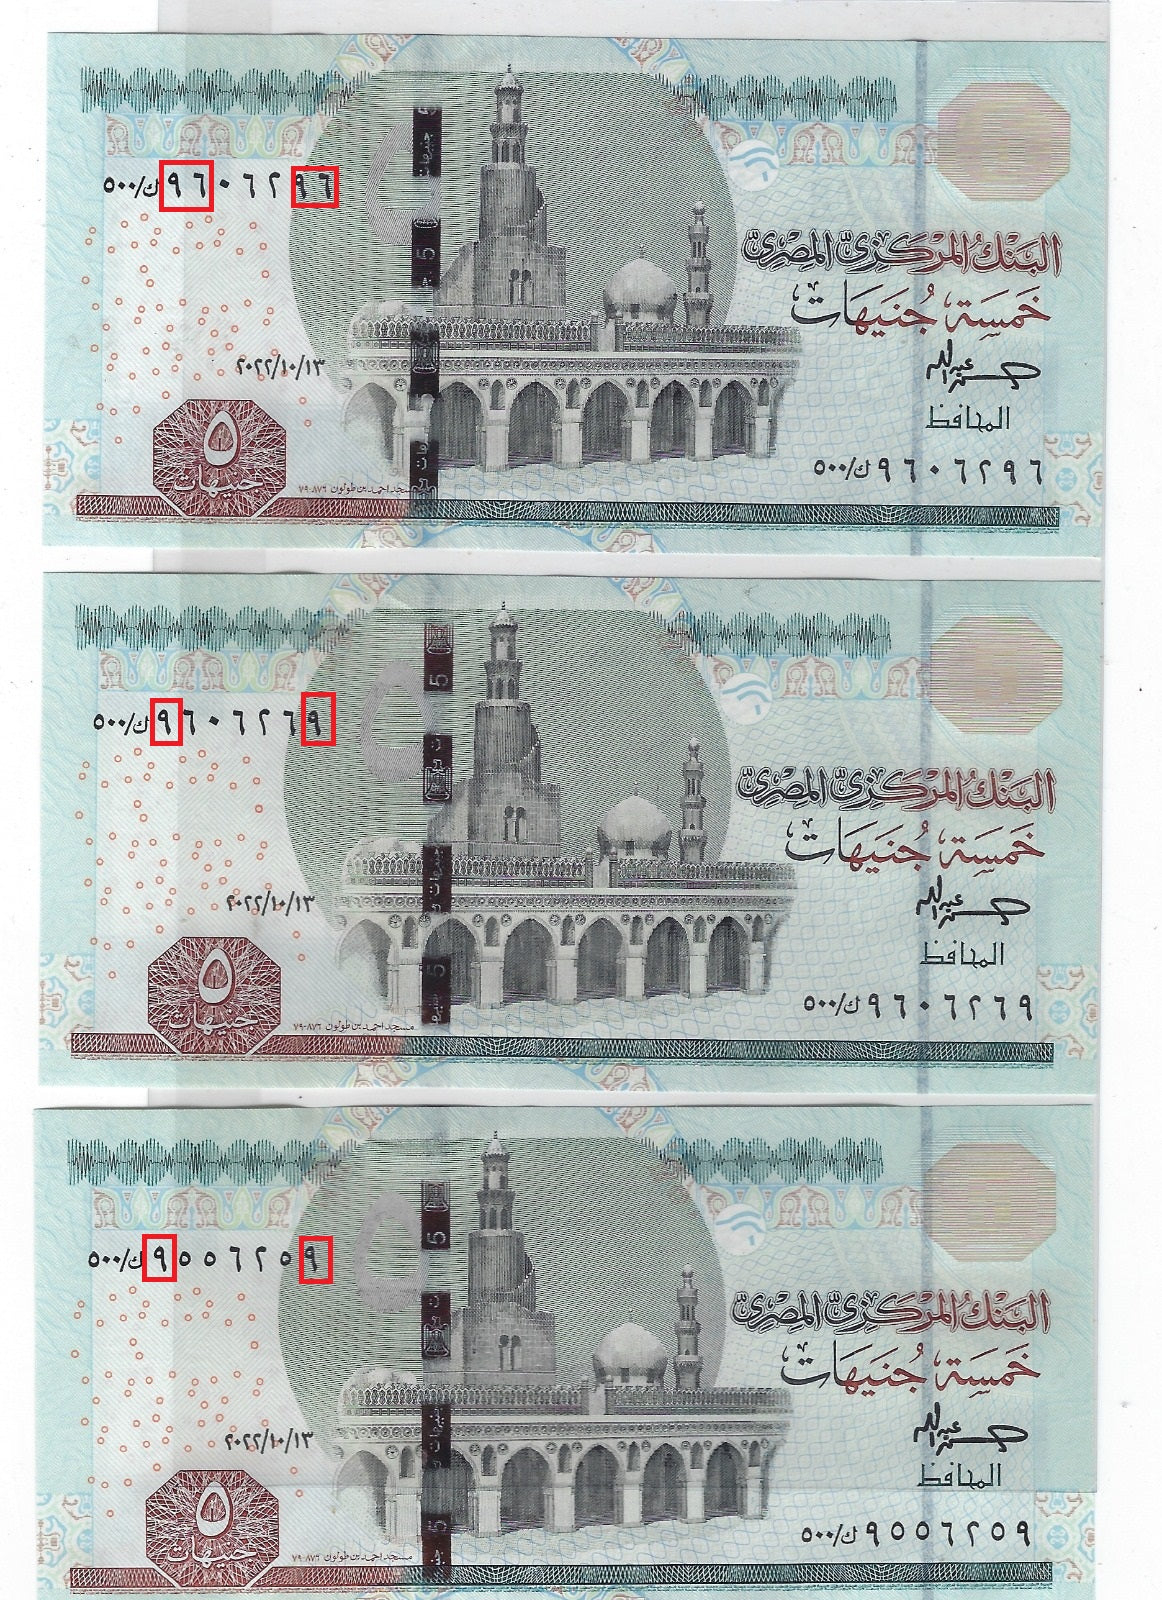 Egypt 5 Pounds REPLACEMENT , Mehilba RF31,P72 (13.11.22) x 3 Fancy Bookends + FREE 10 Pounds 999 ( READ more).EG1R1